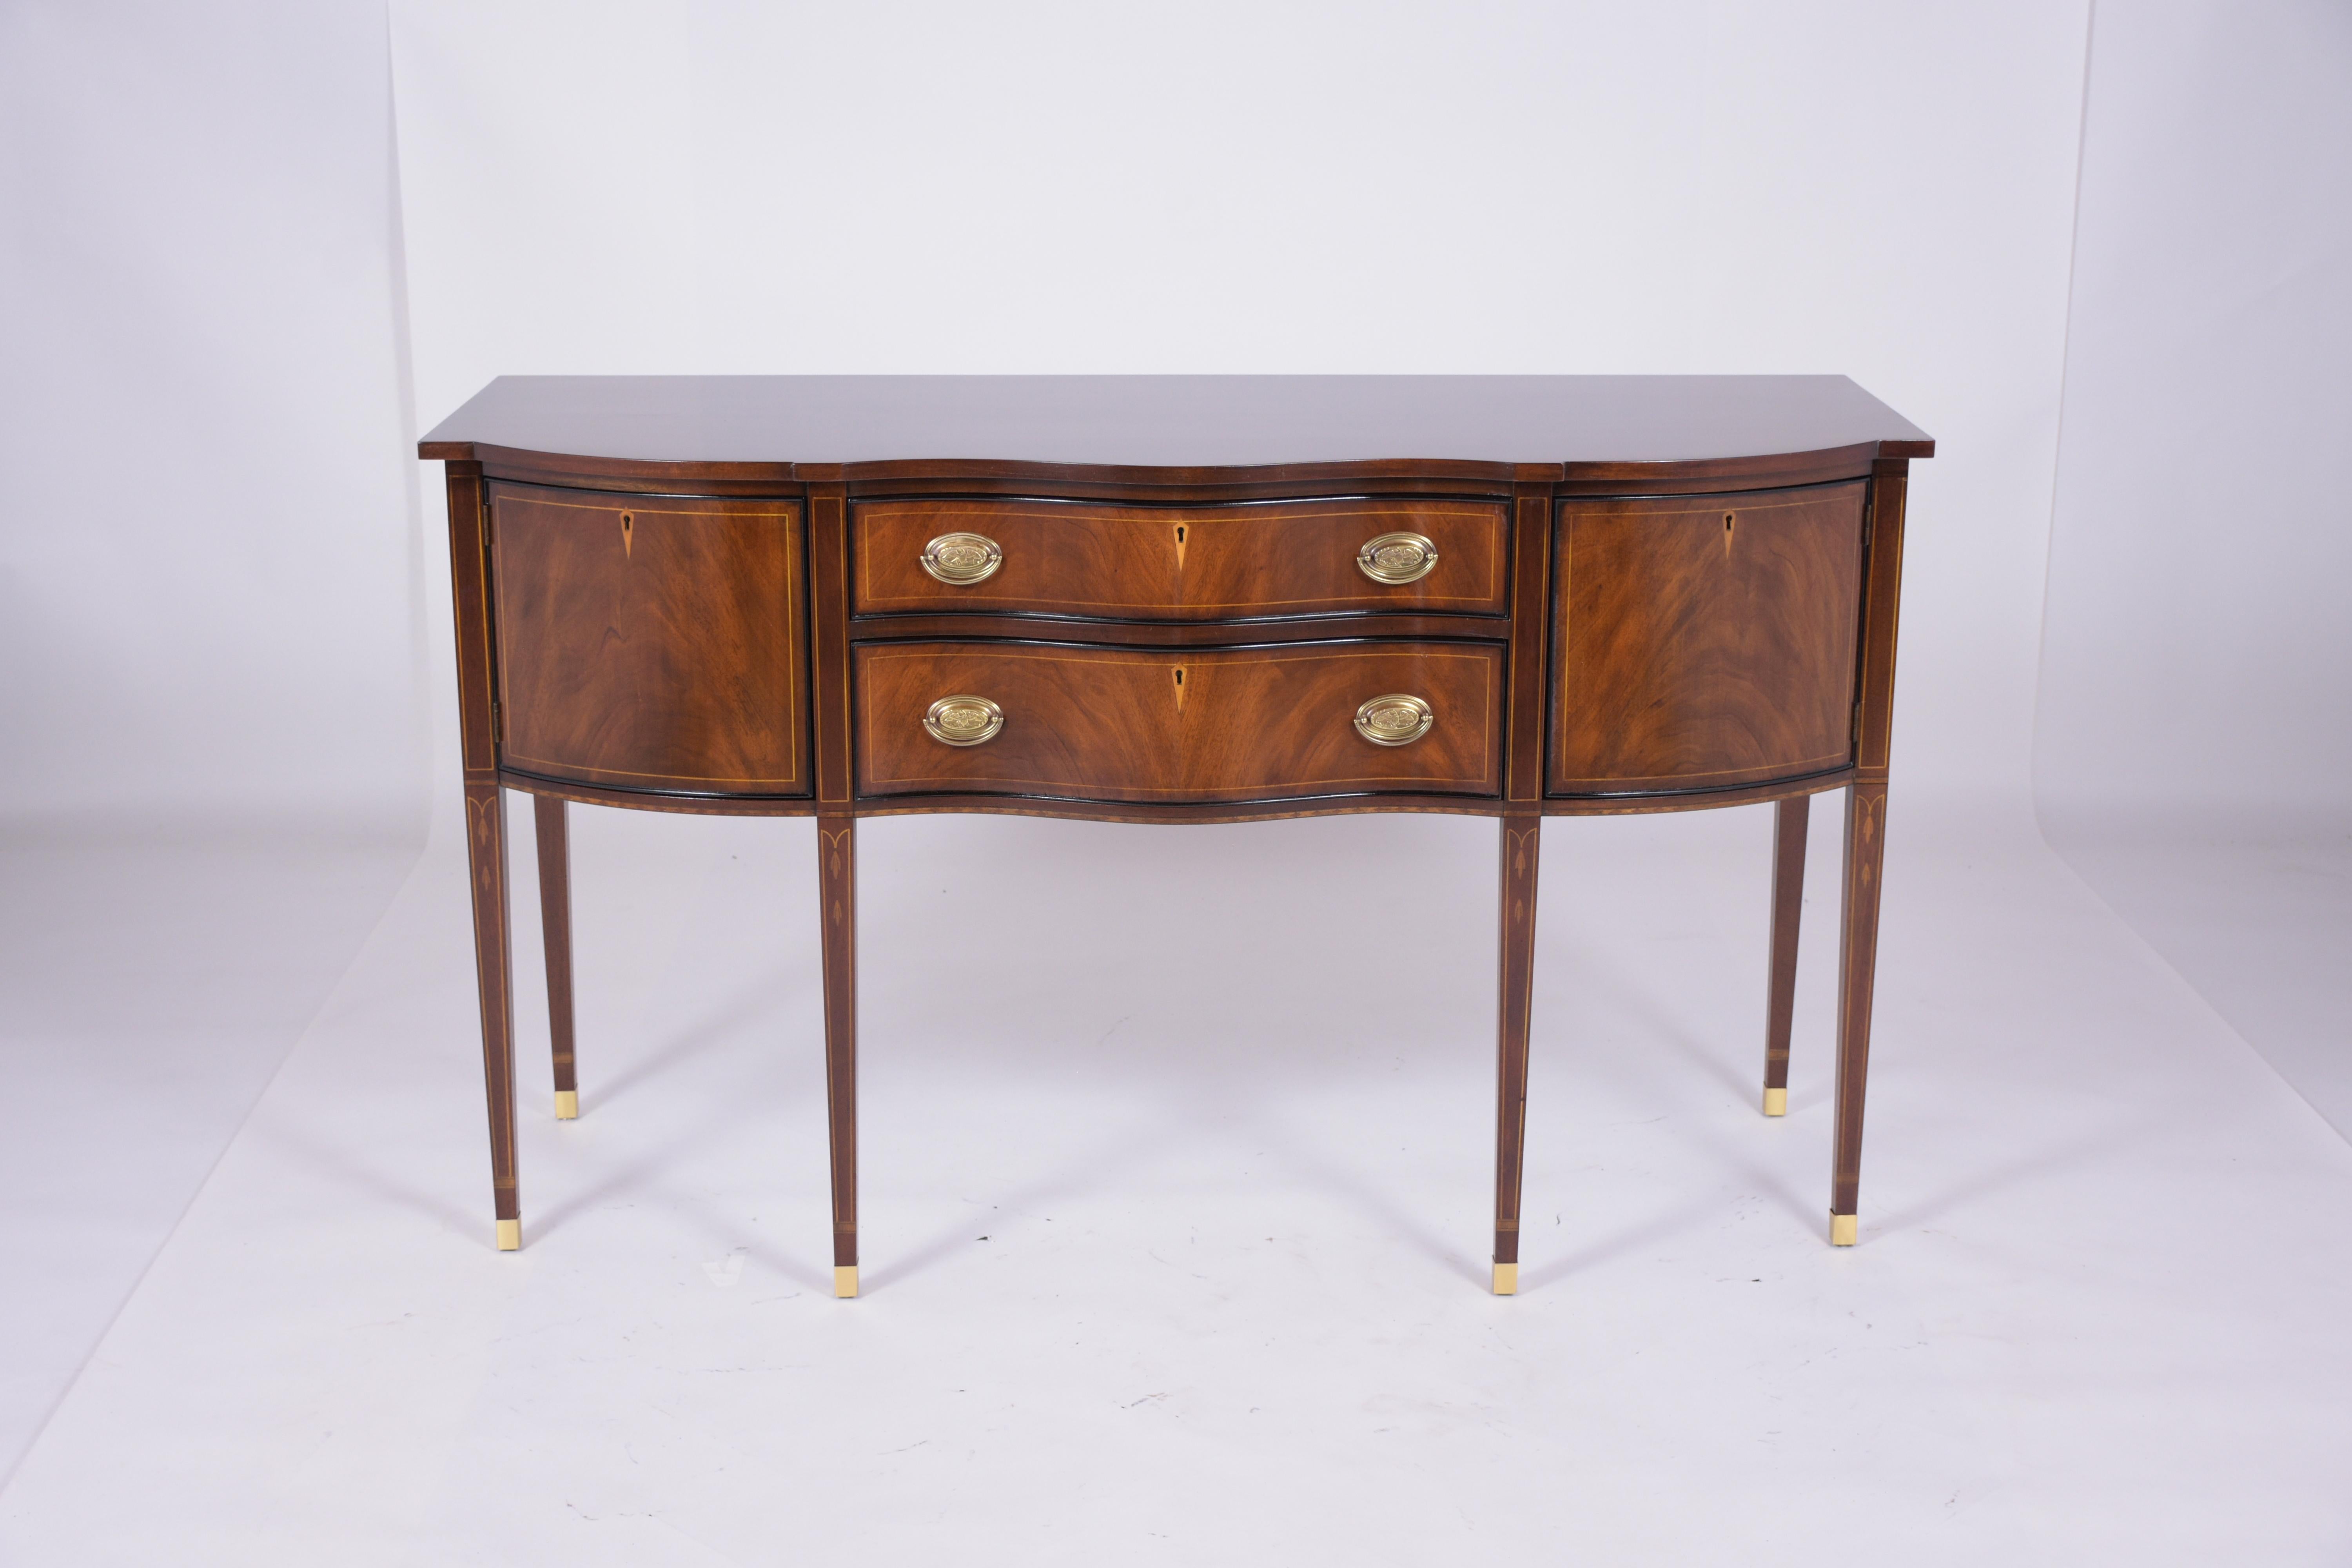 An extraordinary antique George III English sideboard beautiful crafted out mahogany wood has been professionally restored by our craftsmen team. This fabulous piece features its original mahogany color and ebonized moldings finish accents details